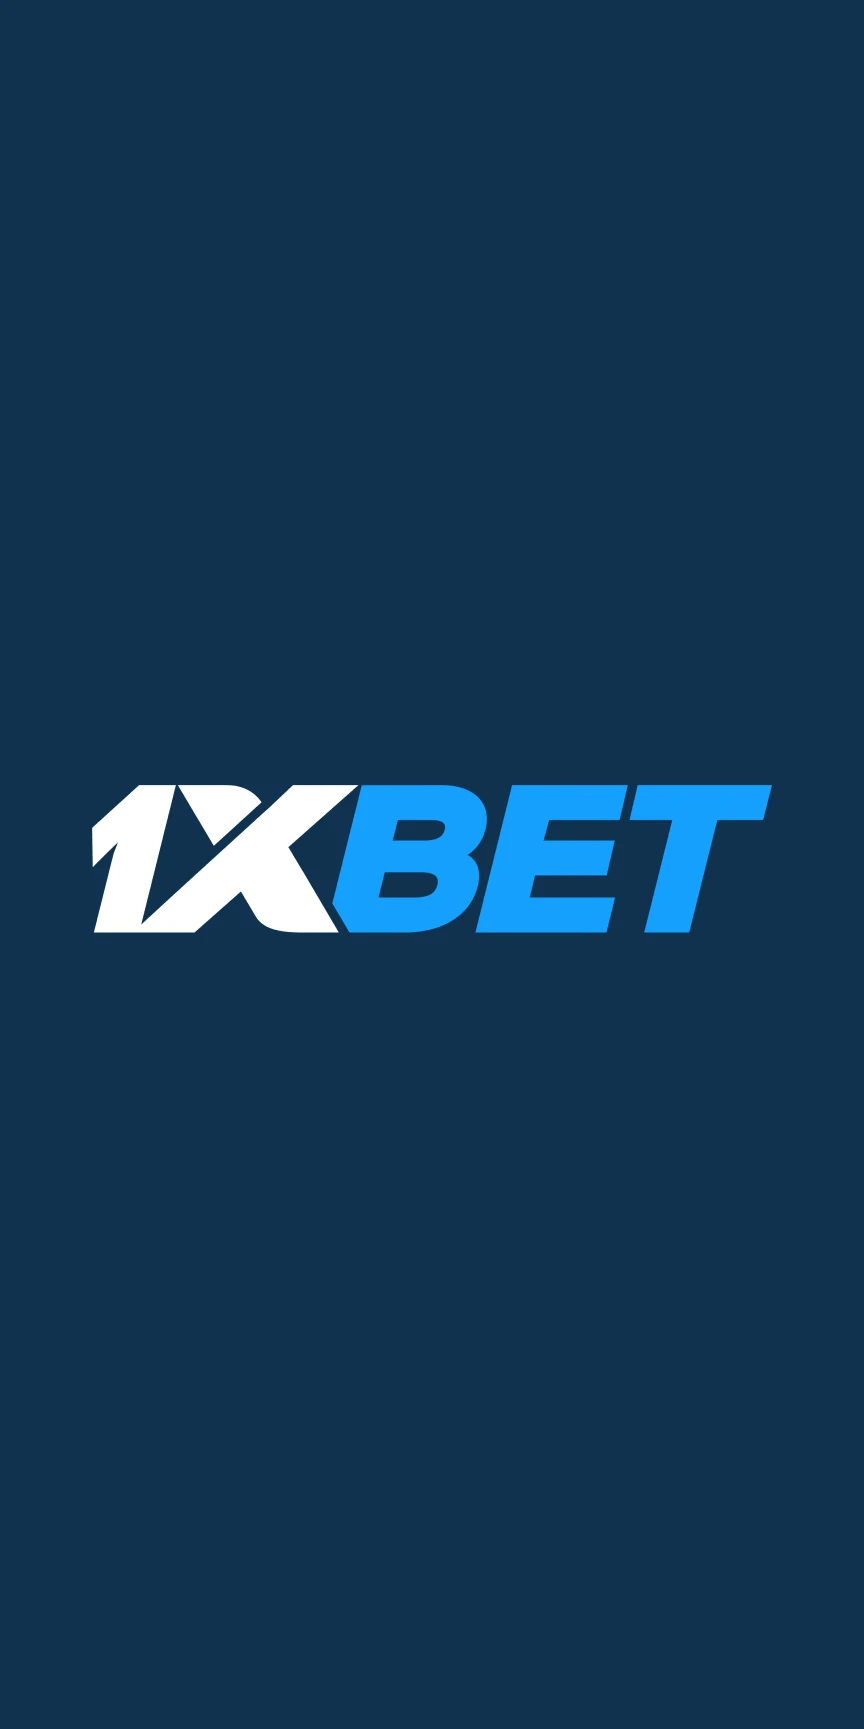 Start installing the 1xbet application for iOS.